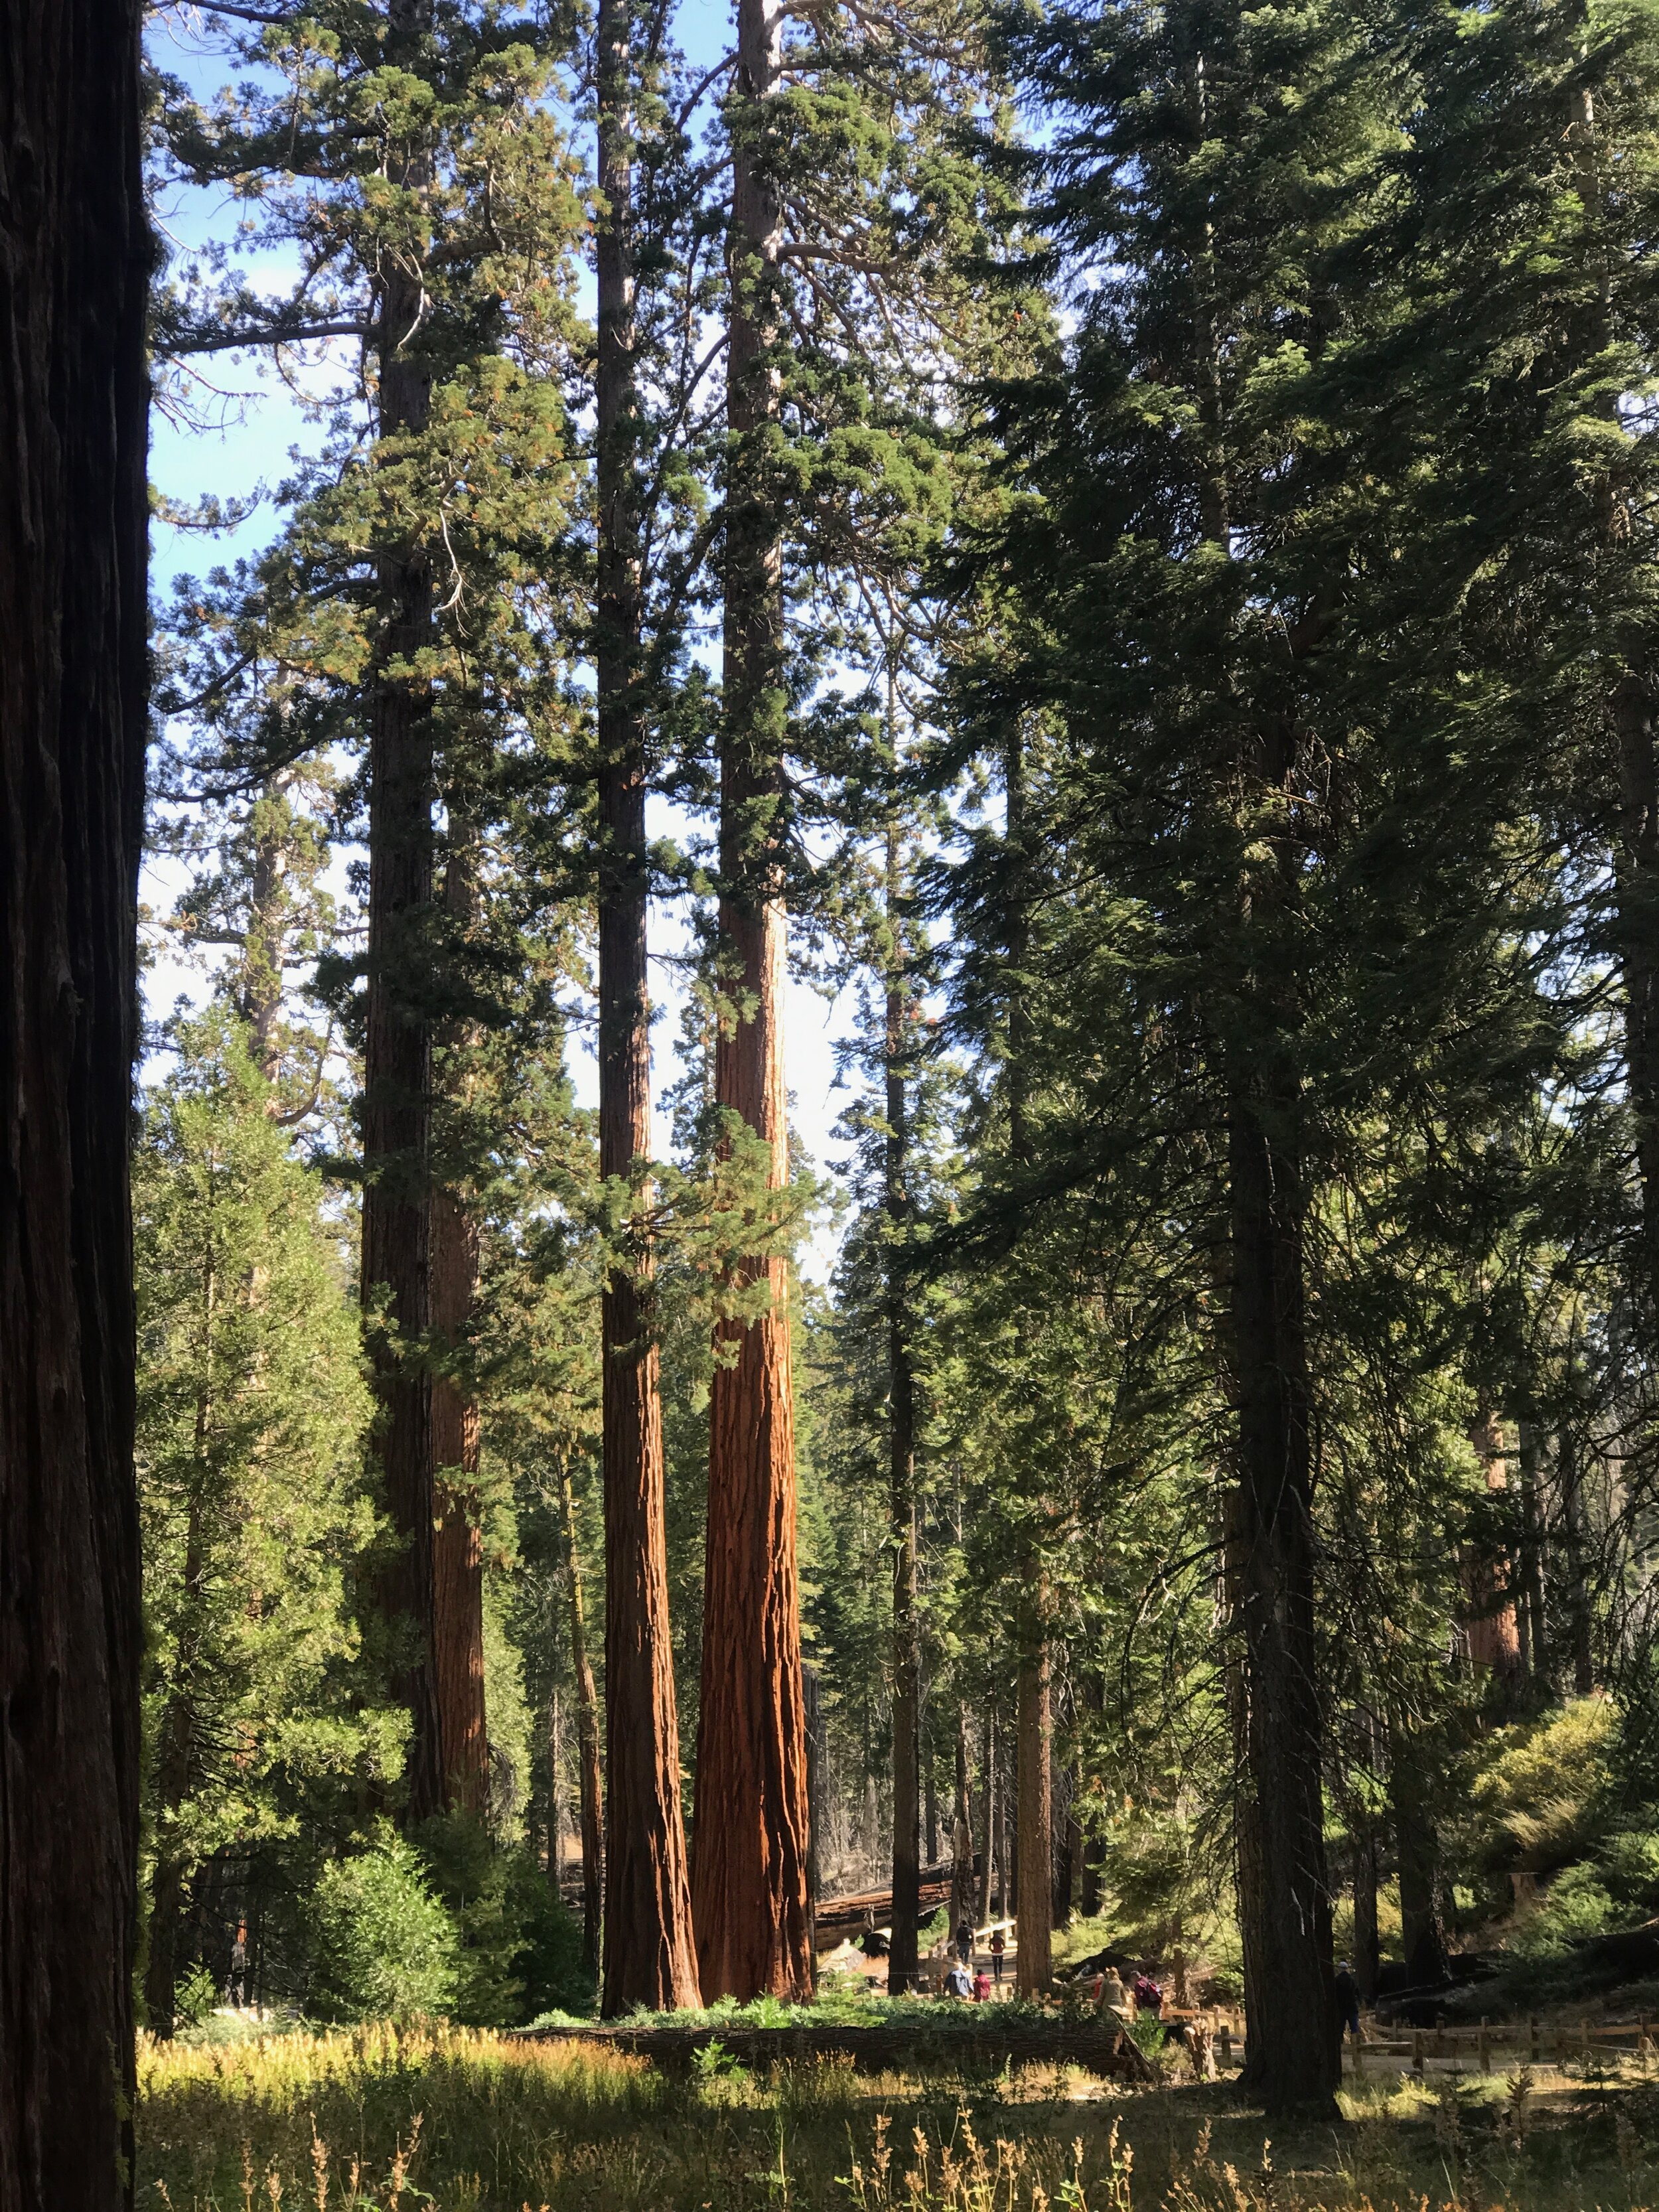  Giant sequoias, part of the redwood family of conifers, in Yosemite's Mariposa Grove. 